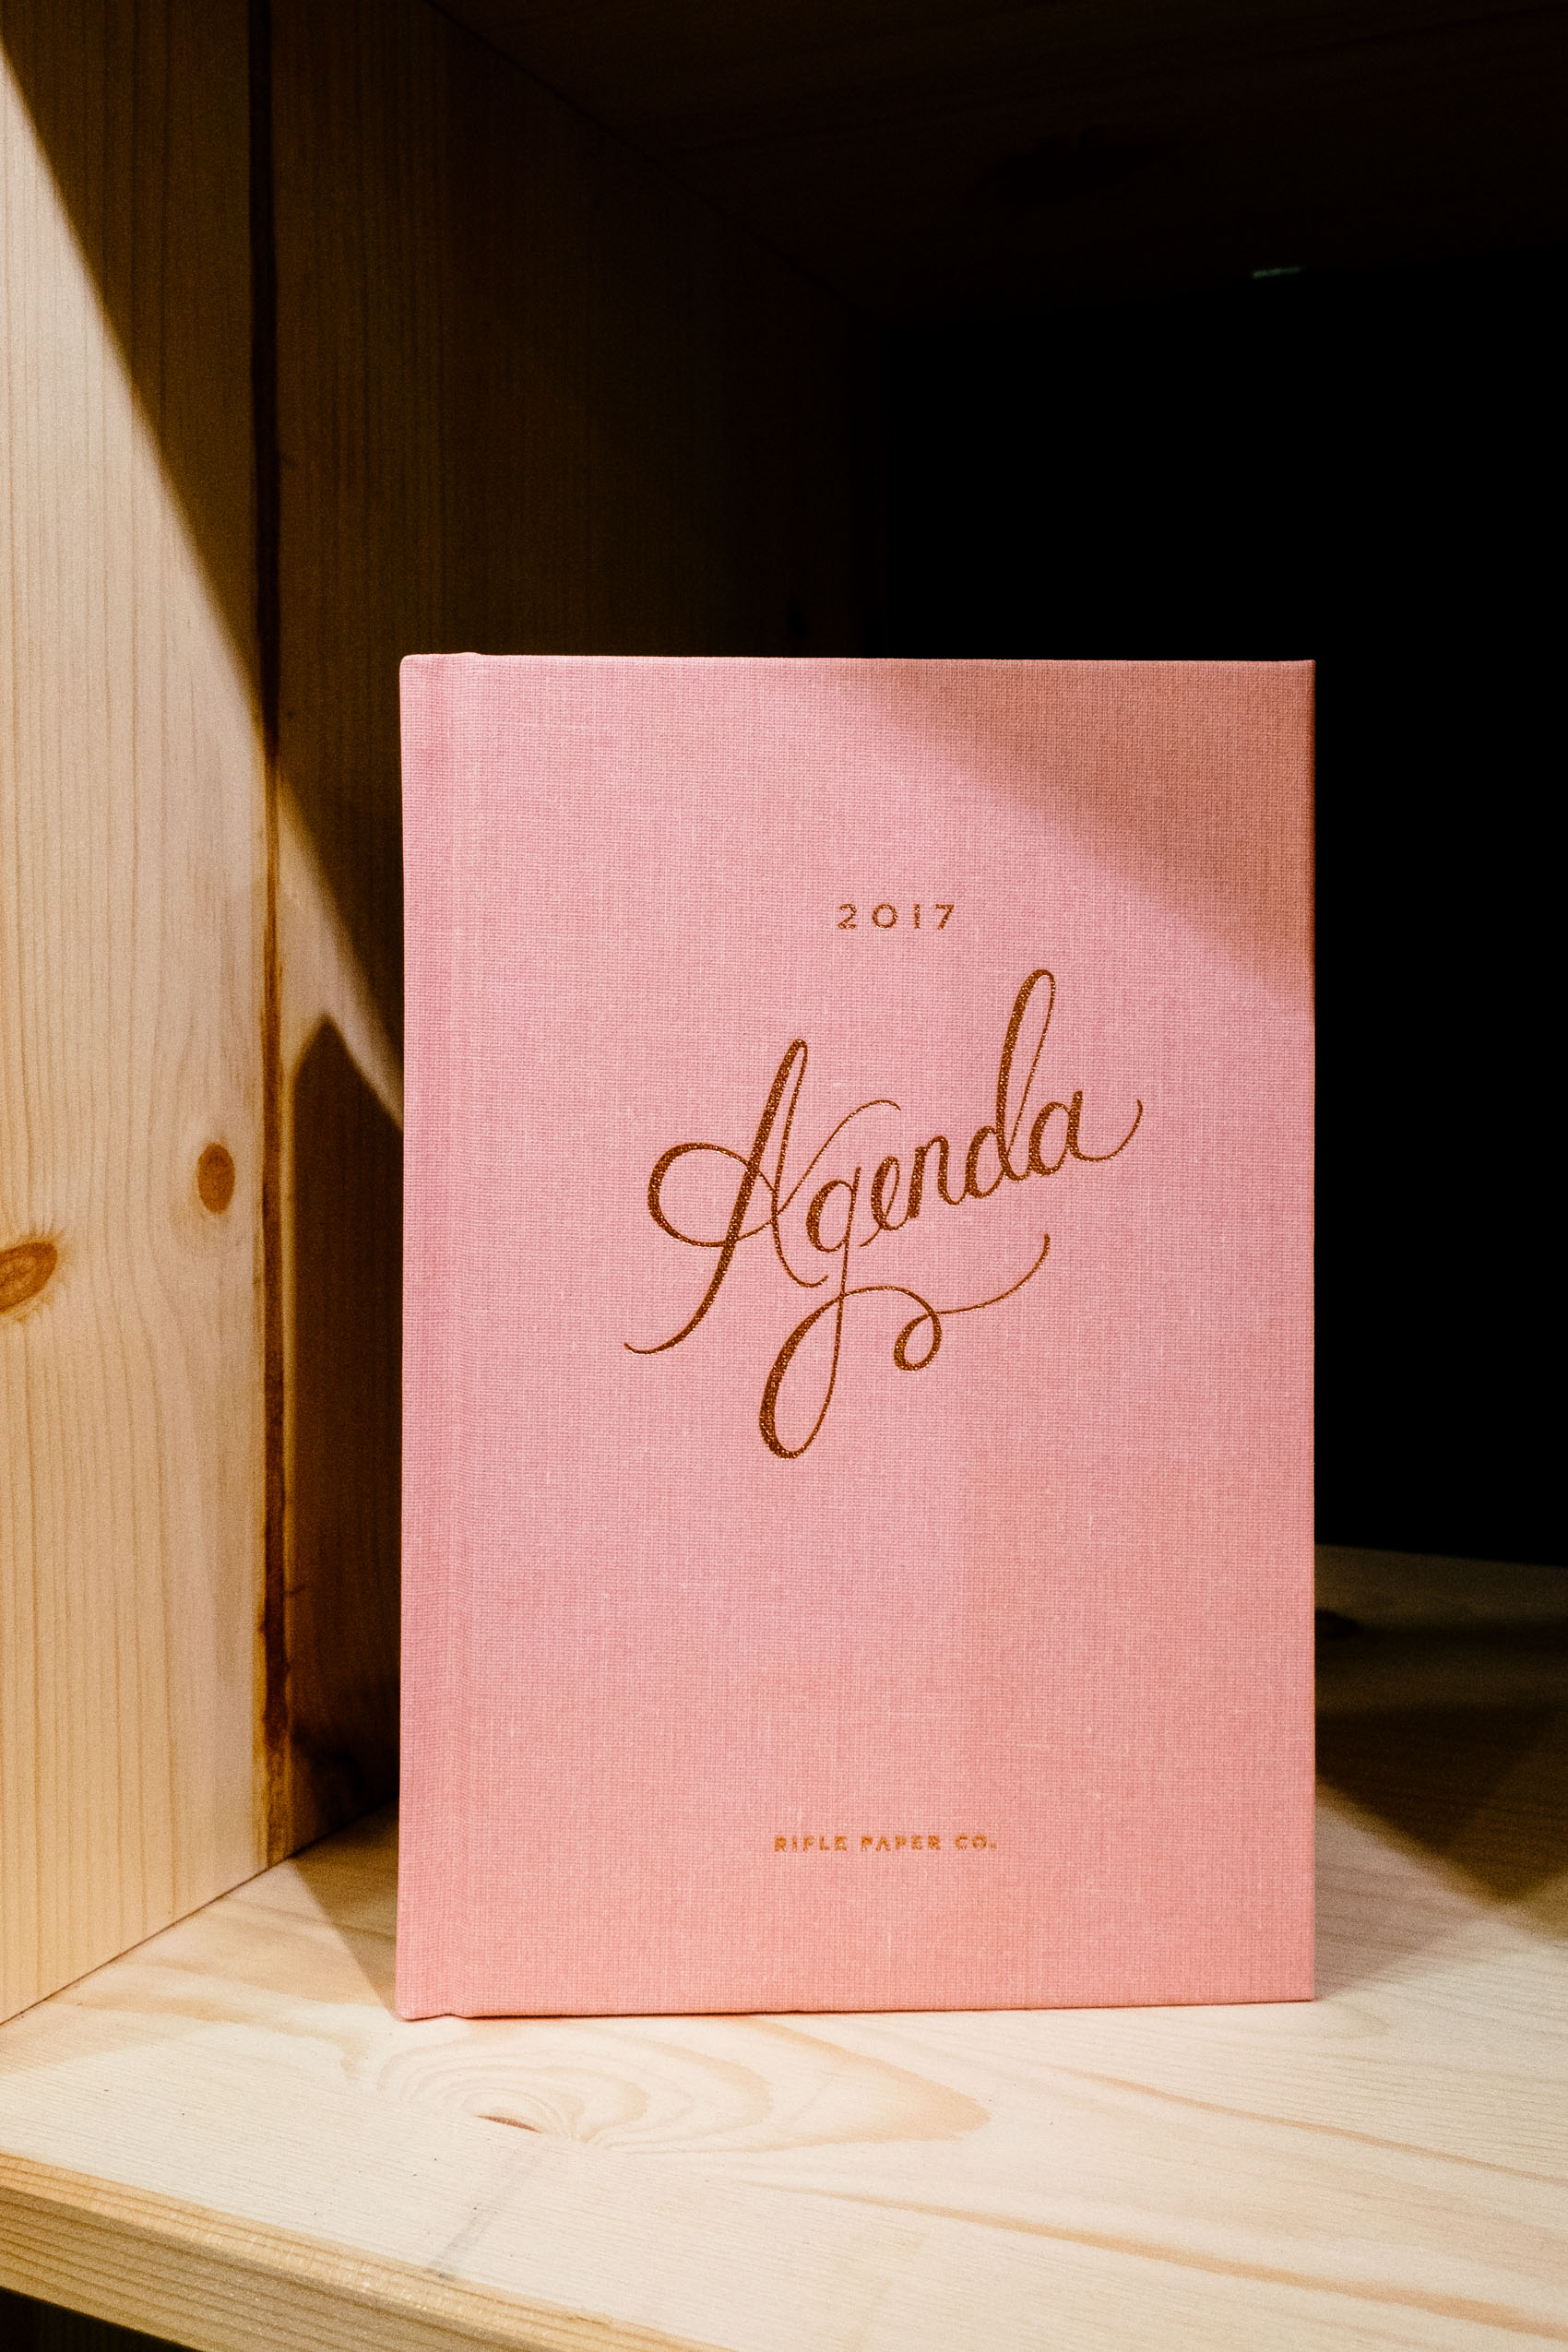 2017 Agenda by Rifle Paper Co. is a perfect stocking stuffer Christmas gift